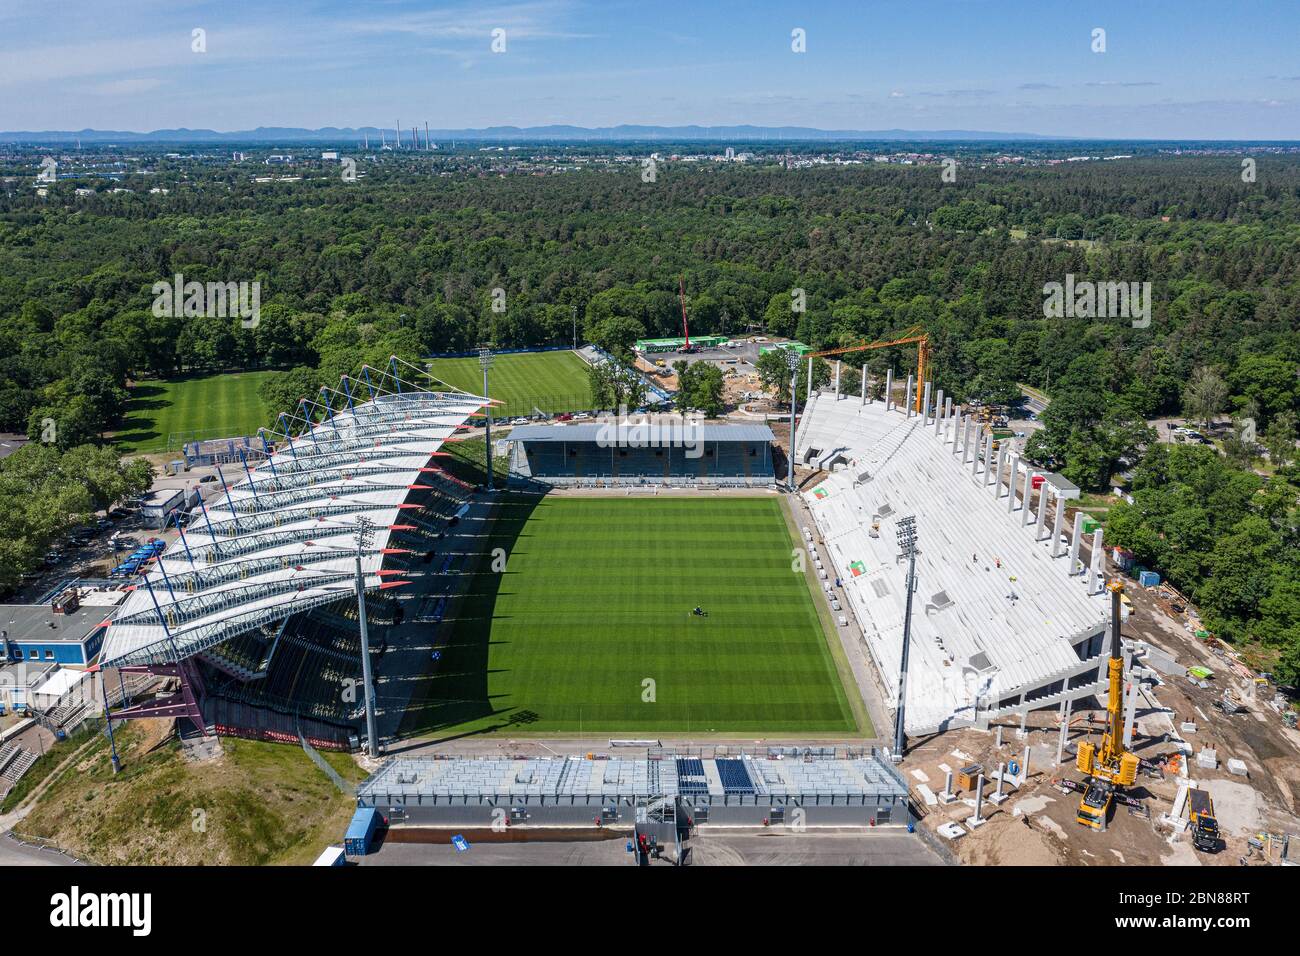 Karlsruhe, Deutschland. 12th May, 2020. Stadium overview Wildparkstadion. The versus straight (right) is currently being built. View of the pitch and the field on which a second division game is to take place next Saturday as a ghost game. Drone shot of construction site at Wildparkstadion Karlsruhe. GES/Football/2nd Bundesliga Karlsruher SC Wildpark Stadium, May 12, 2020 Football/Soccer: 2nd German Bundesliga: Karlsruher SC Stadium, Karlsruhe, May 12, 2020 Drone view over KSC-Wildpark Stadium under construction. | usage worldwide Credit: dpa/Alamy Live News Stock Photo